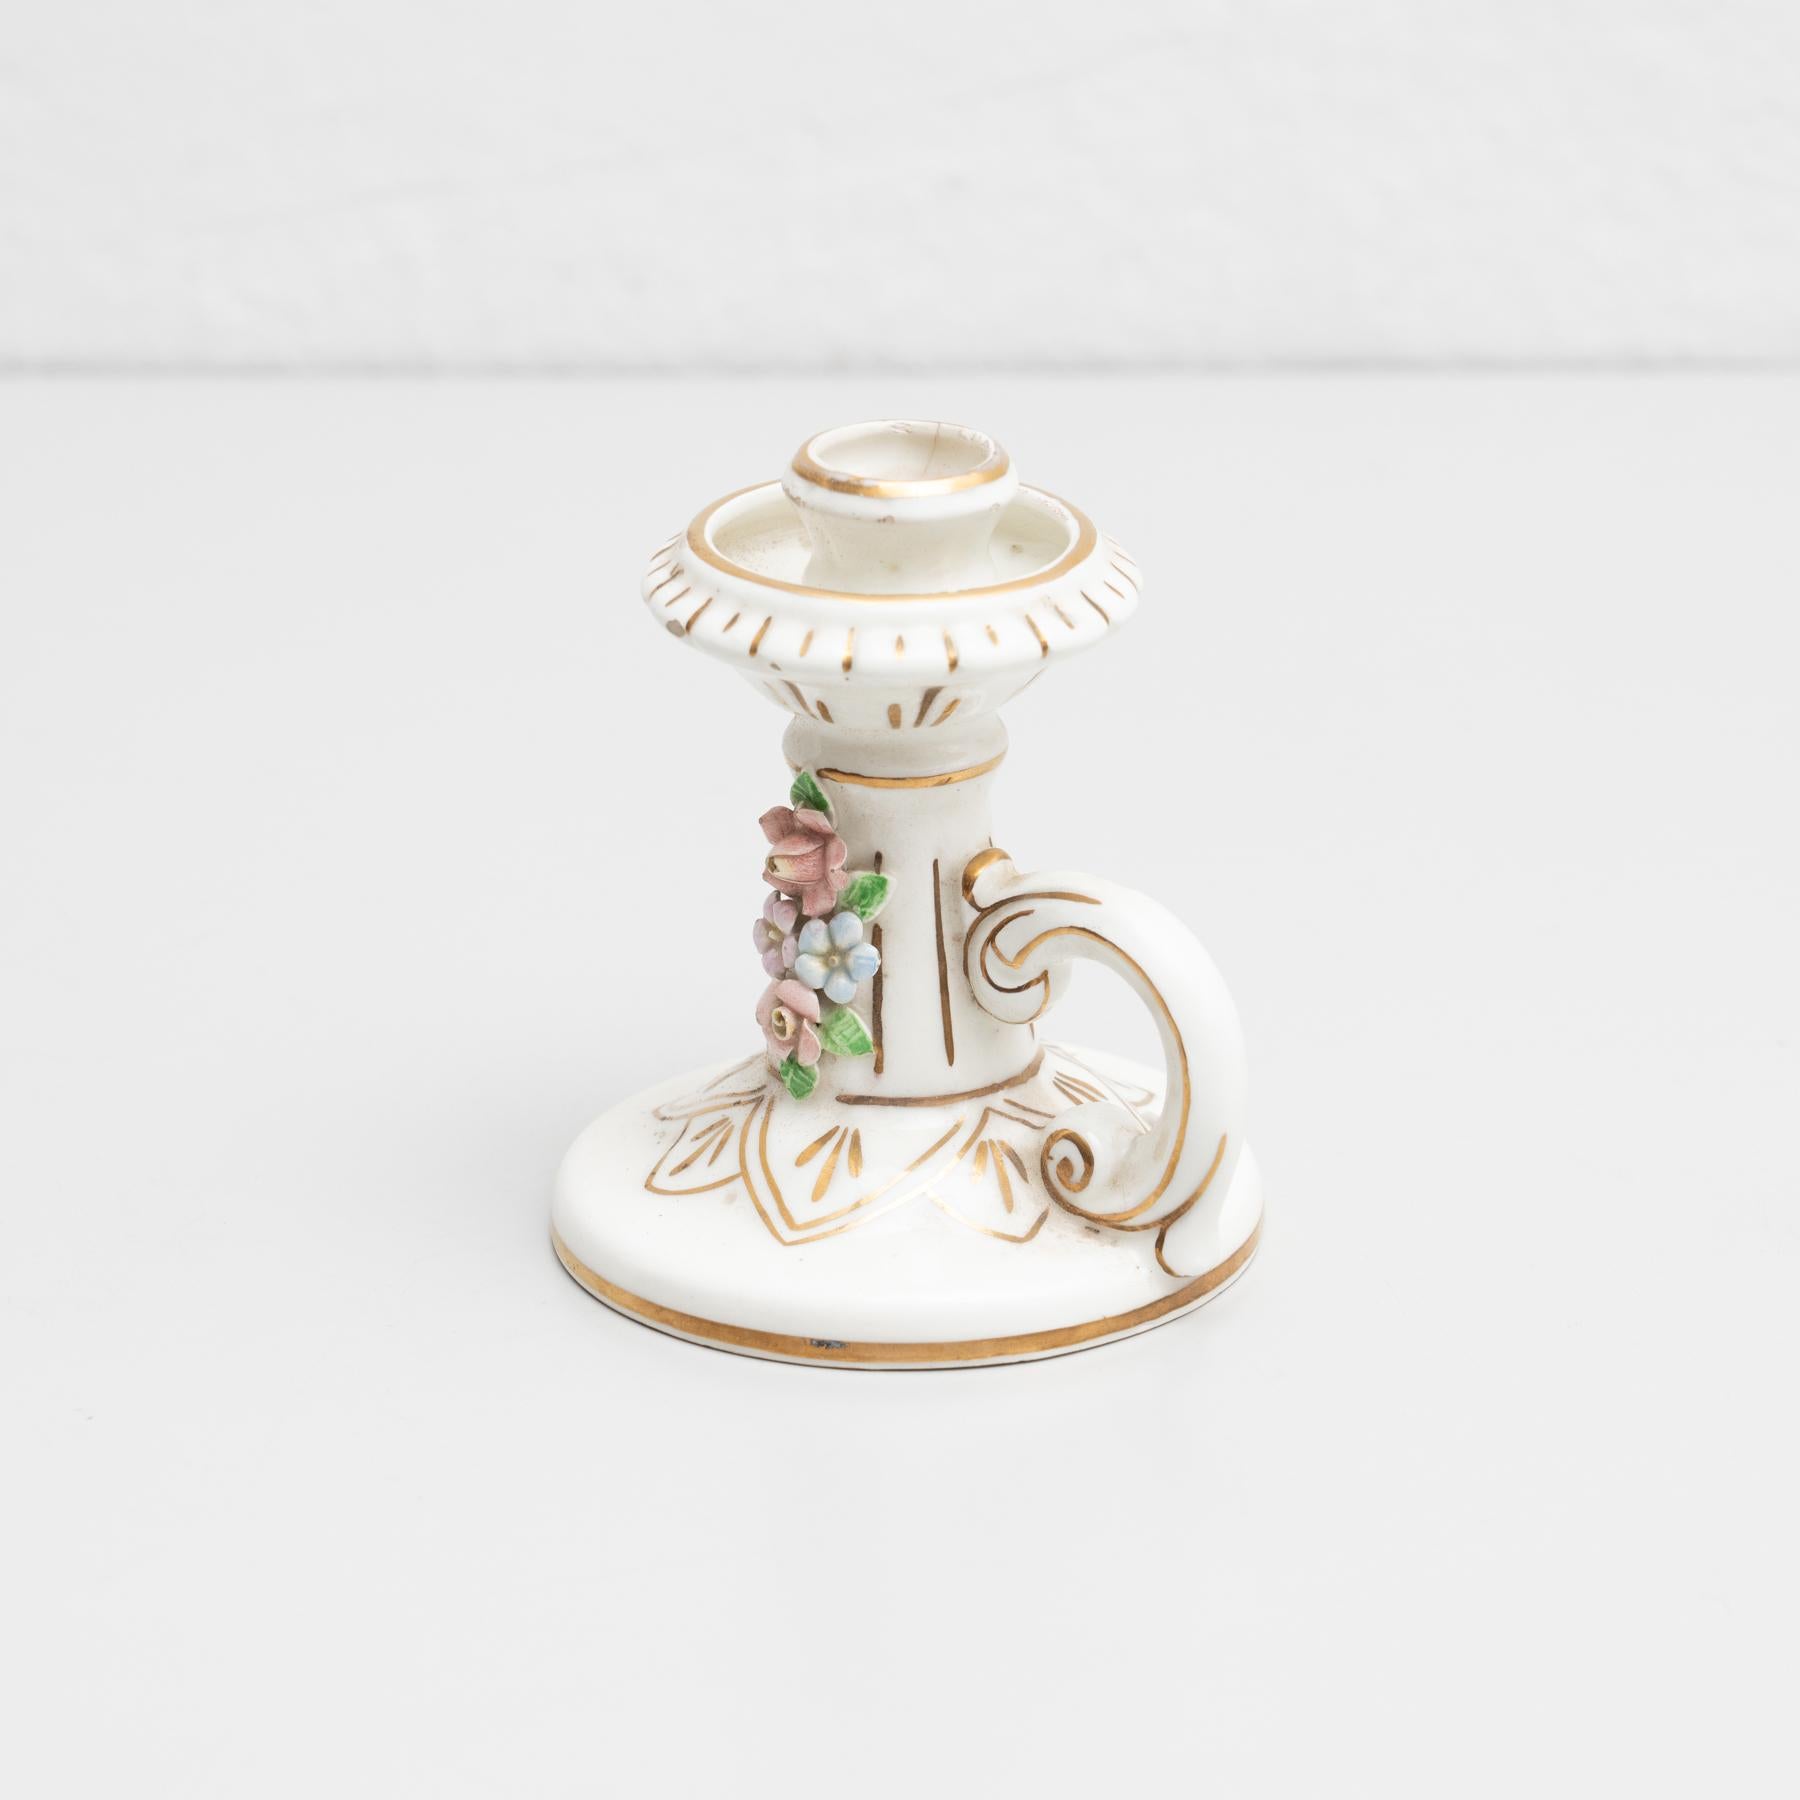 Traditional ceramic hand-painted candle holder decorated with a floral design.

Made by unknown manufacturer in Spain, circa 1960.

In original condition, with minor wear consistent with age and use, preserving a beautiful